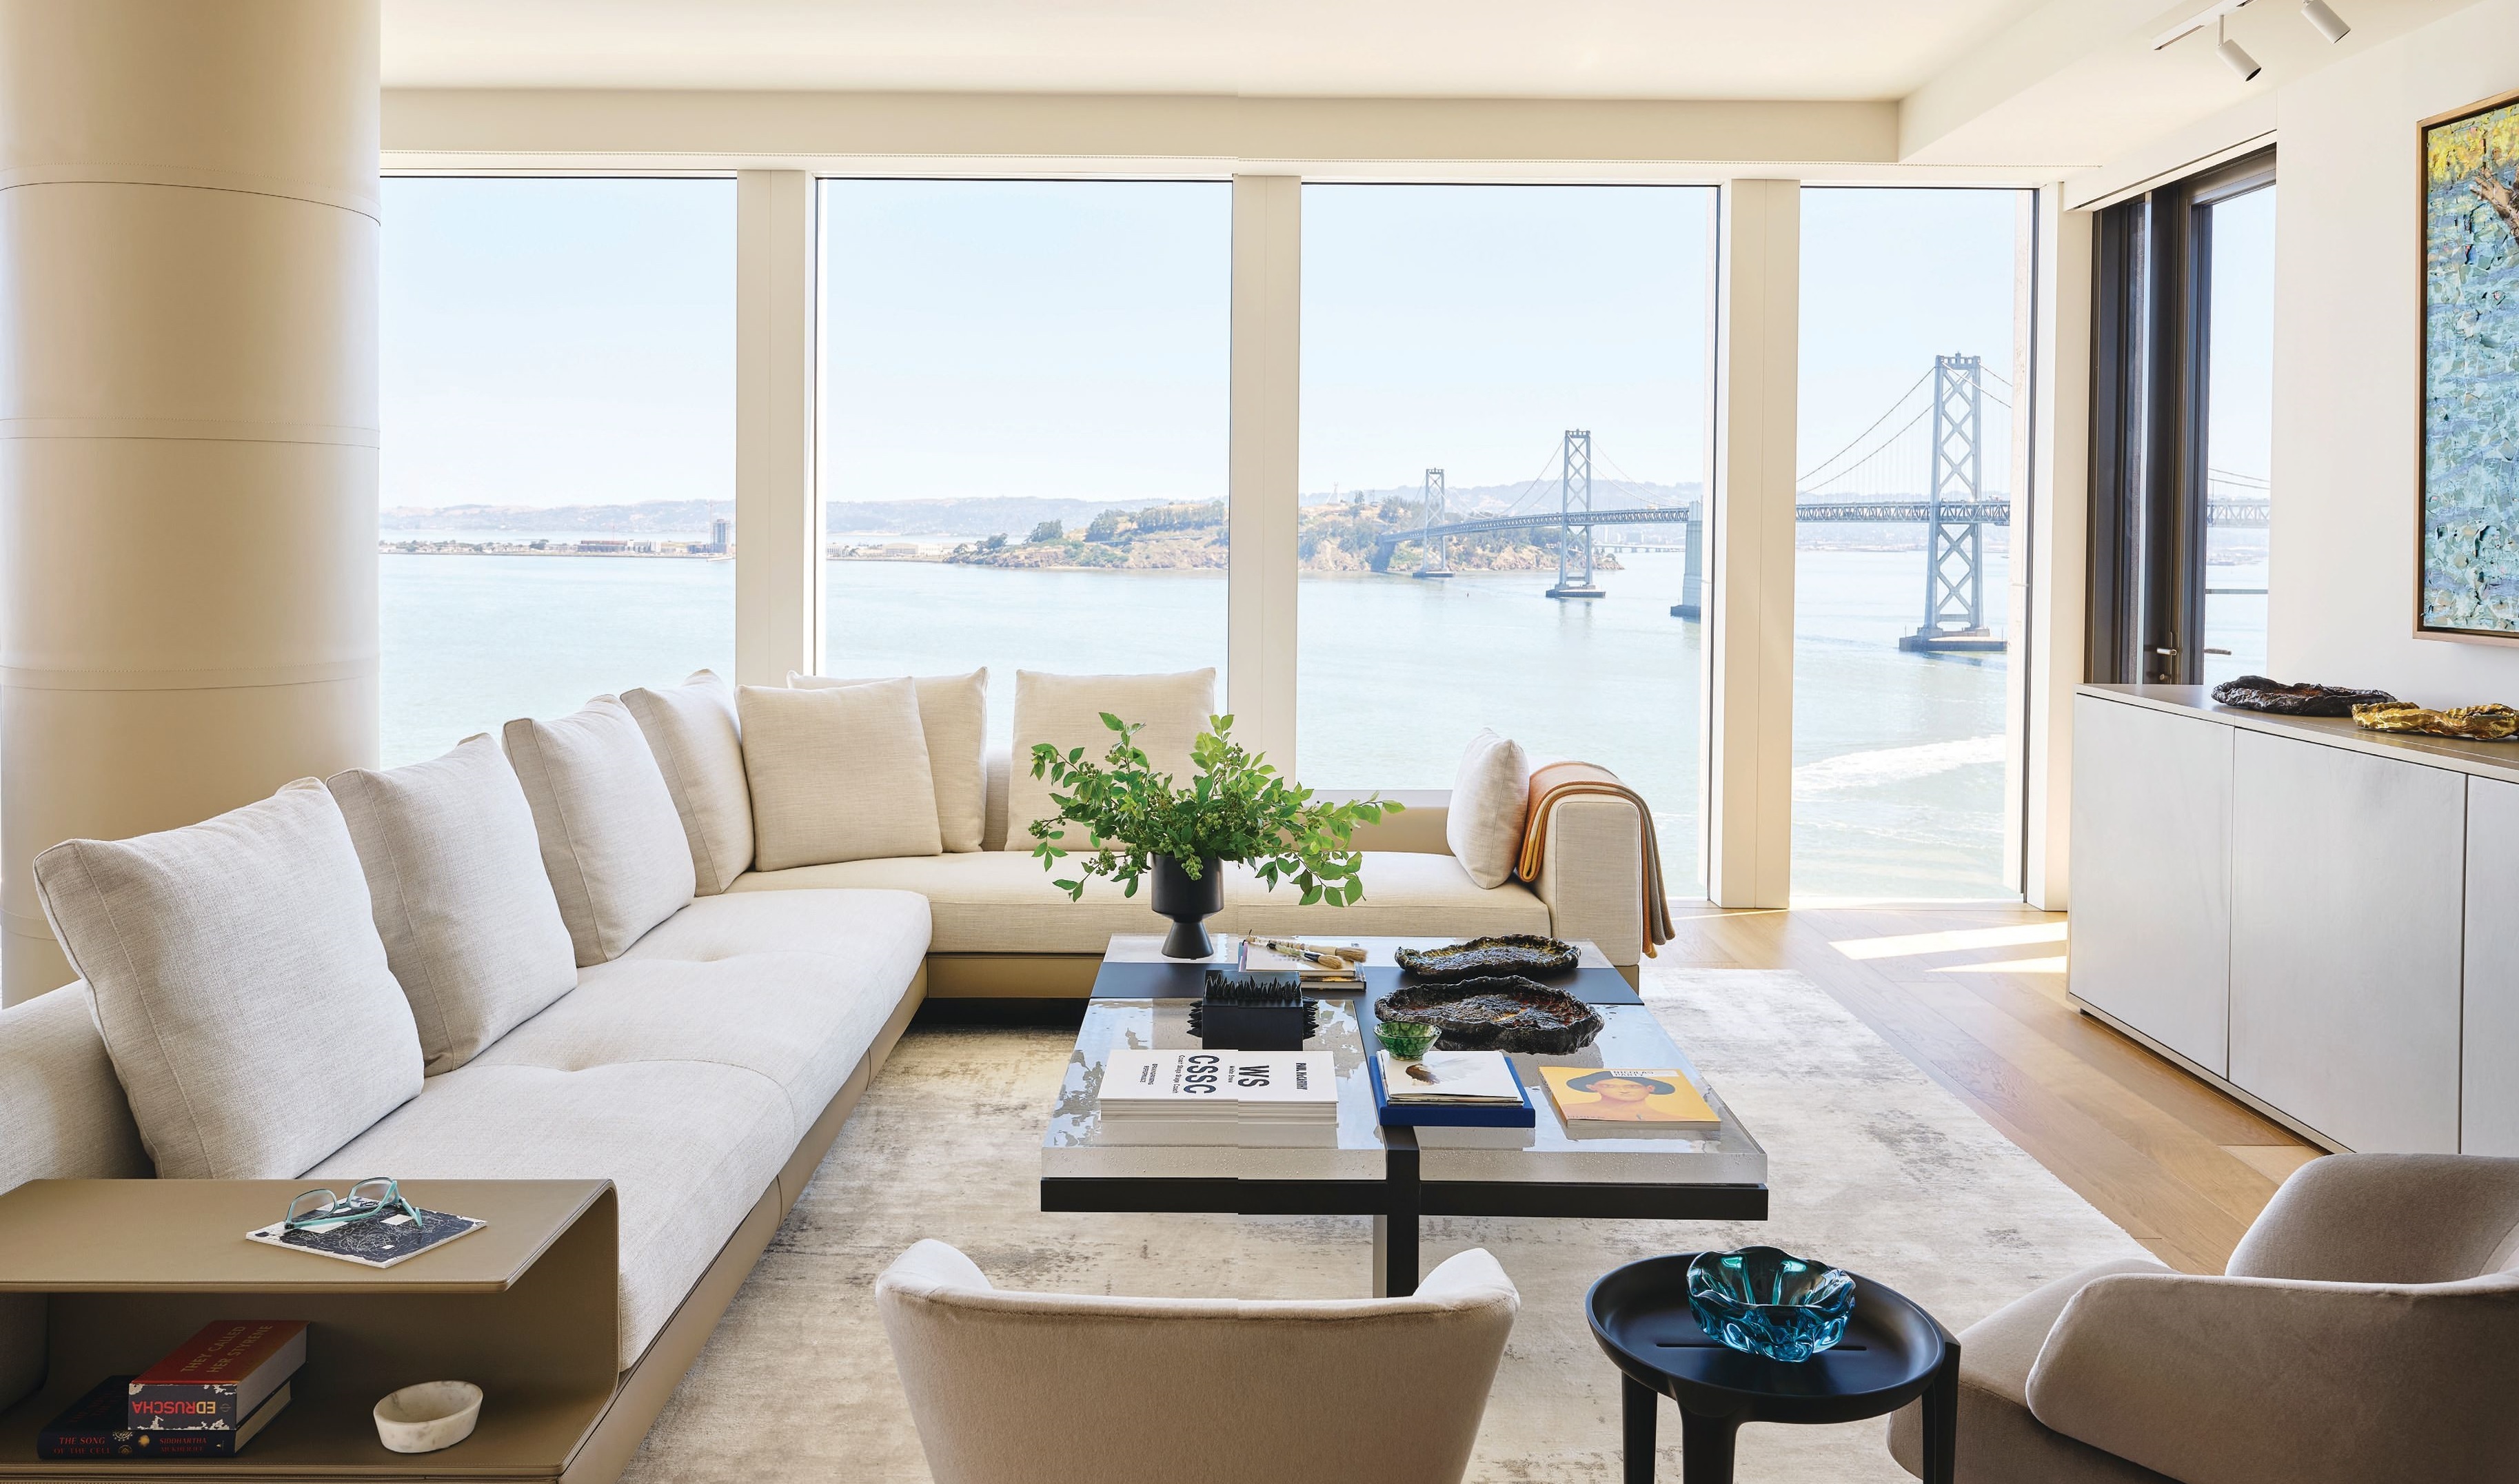 The condo boasts exceptional views of the Bay Bridge from nearly every room. PHOTOGRAPHED BY R. BRAD KNIPSTEIN